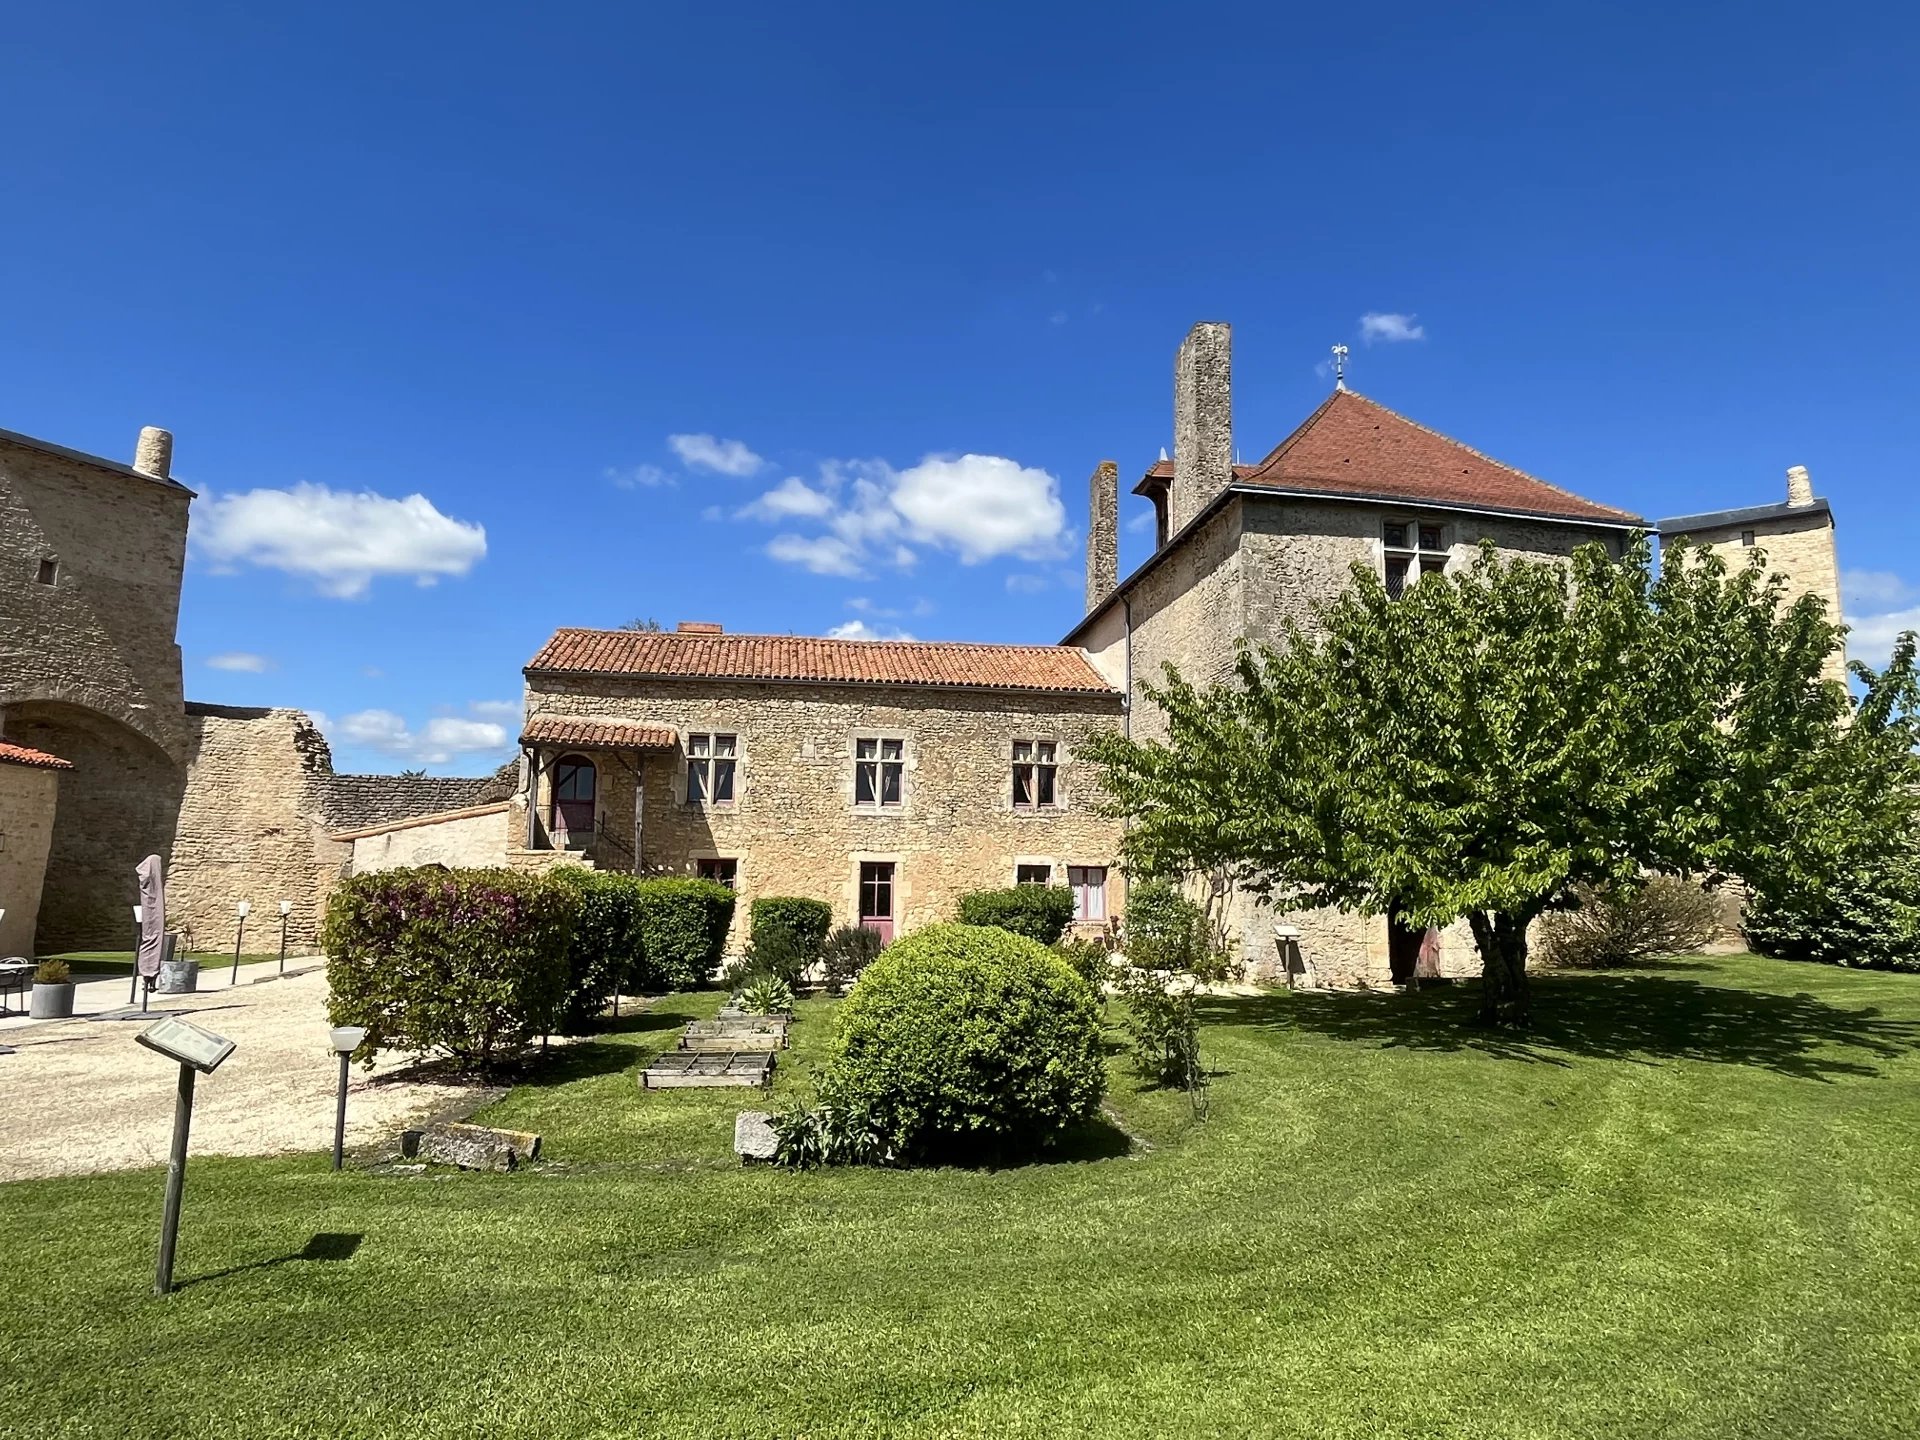 Renovated Medieval chateau fort overlooking historic town